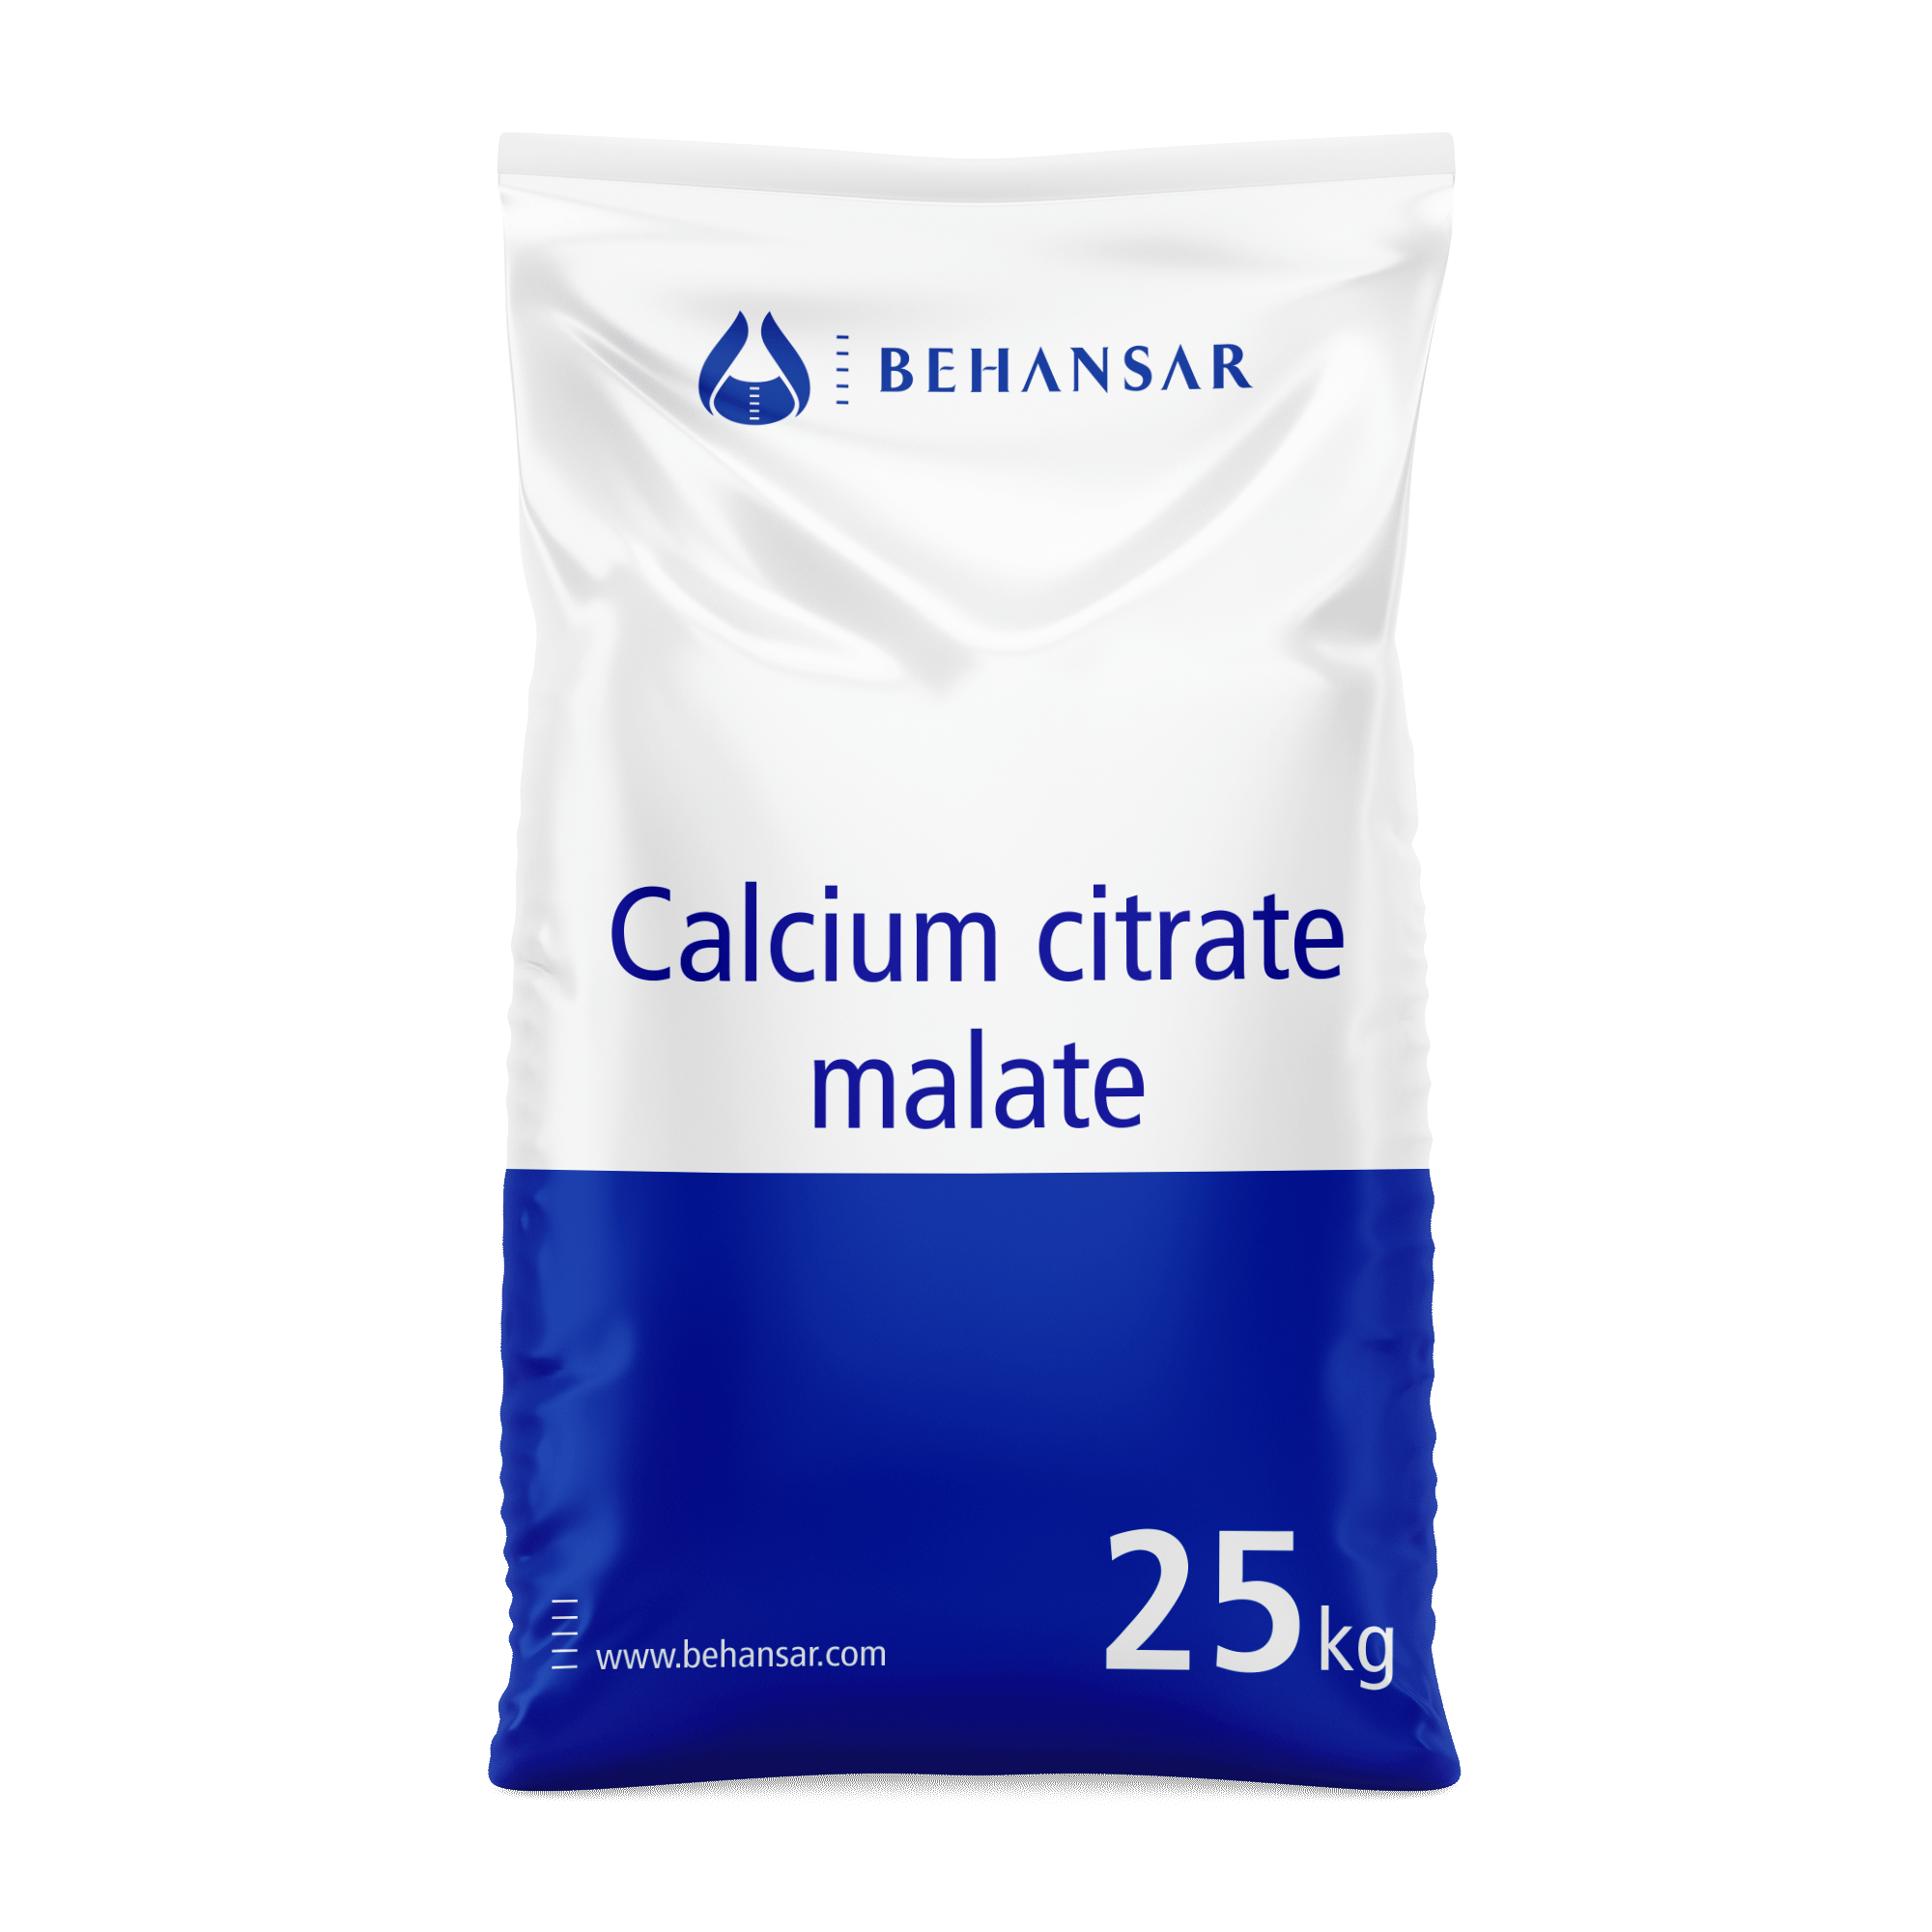 Calcium citrate malate is one of the products of Behansar Co